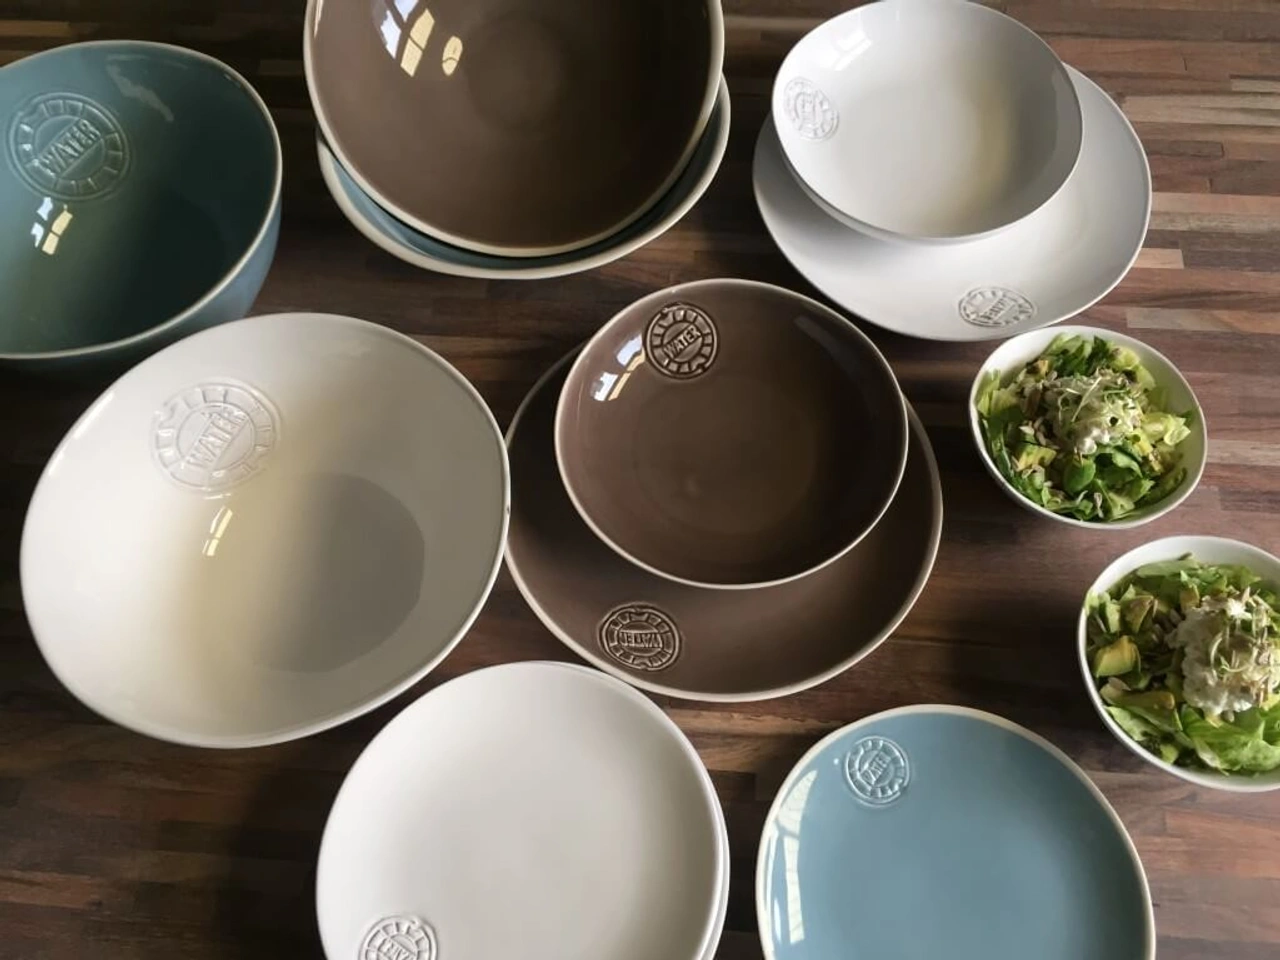 Bowls and Dishes: feest servies